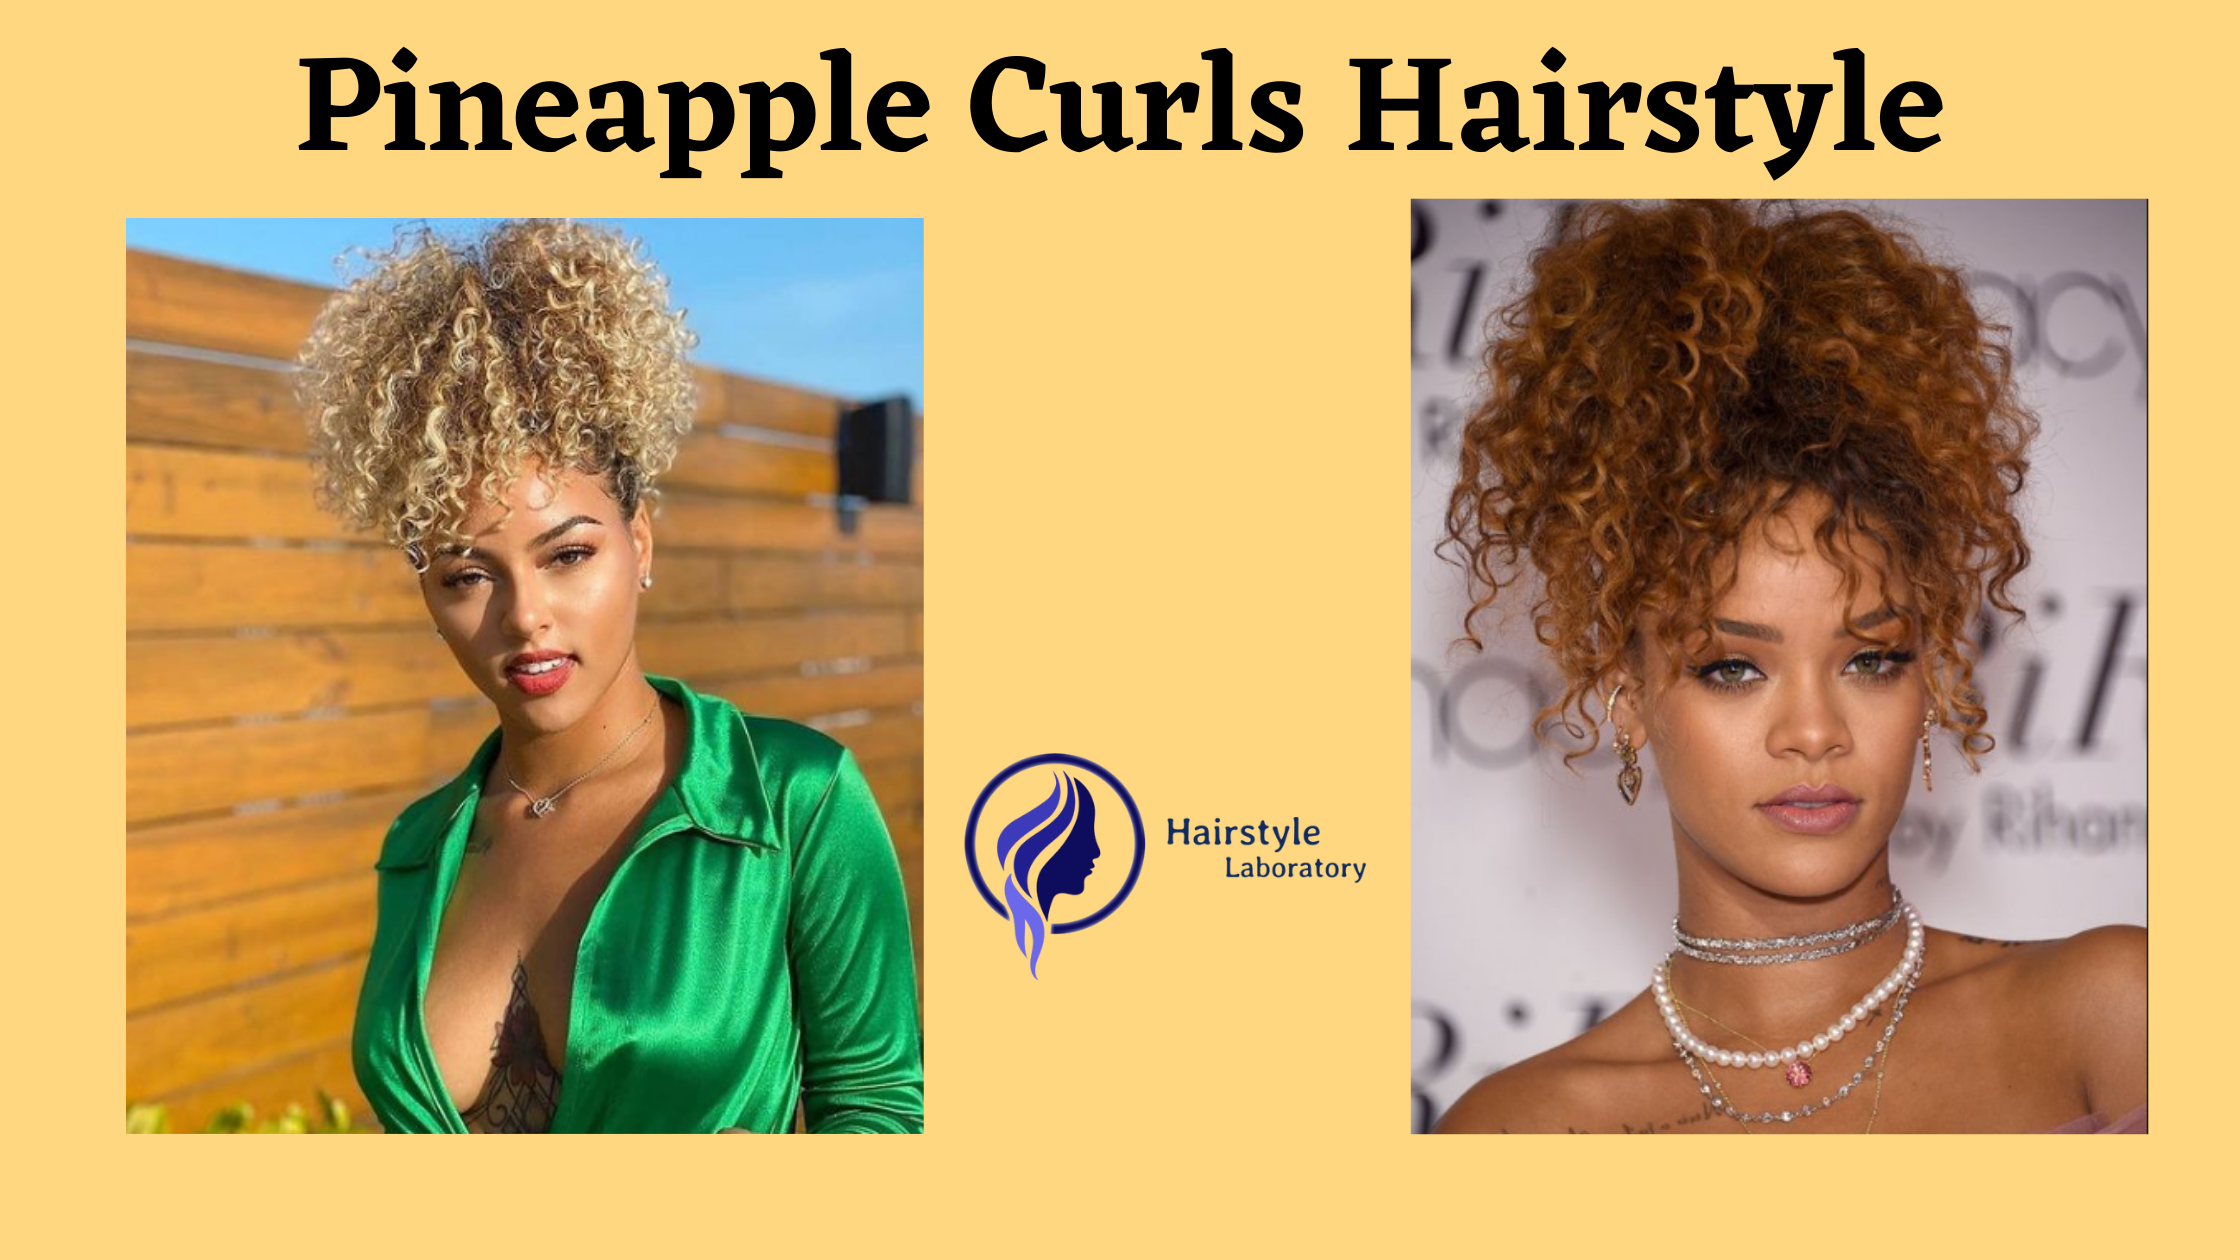 Pineapple Curls: The Best Curly Hairstyle Method and